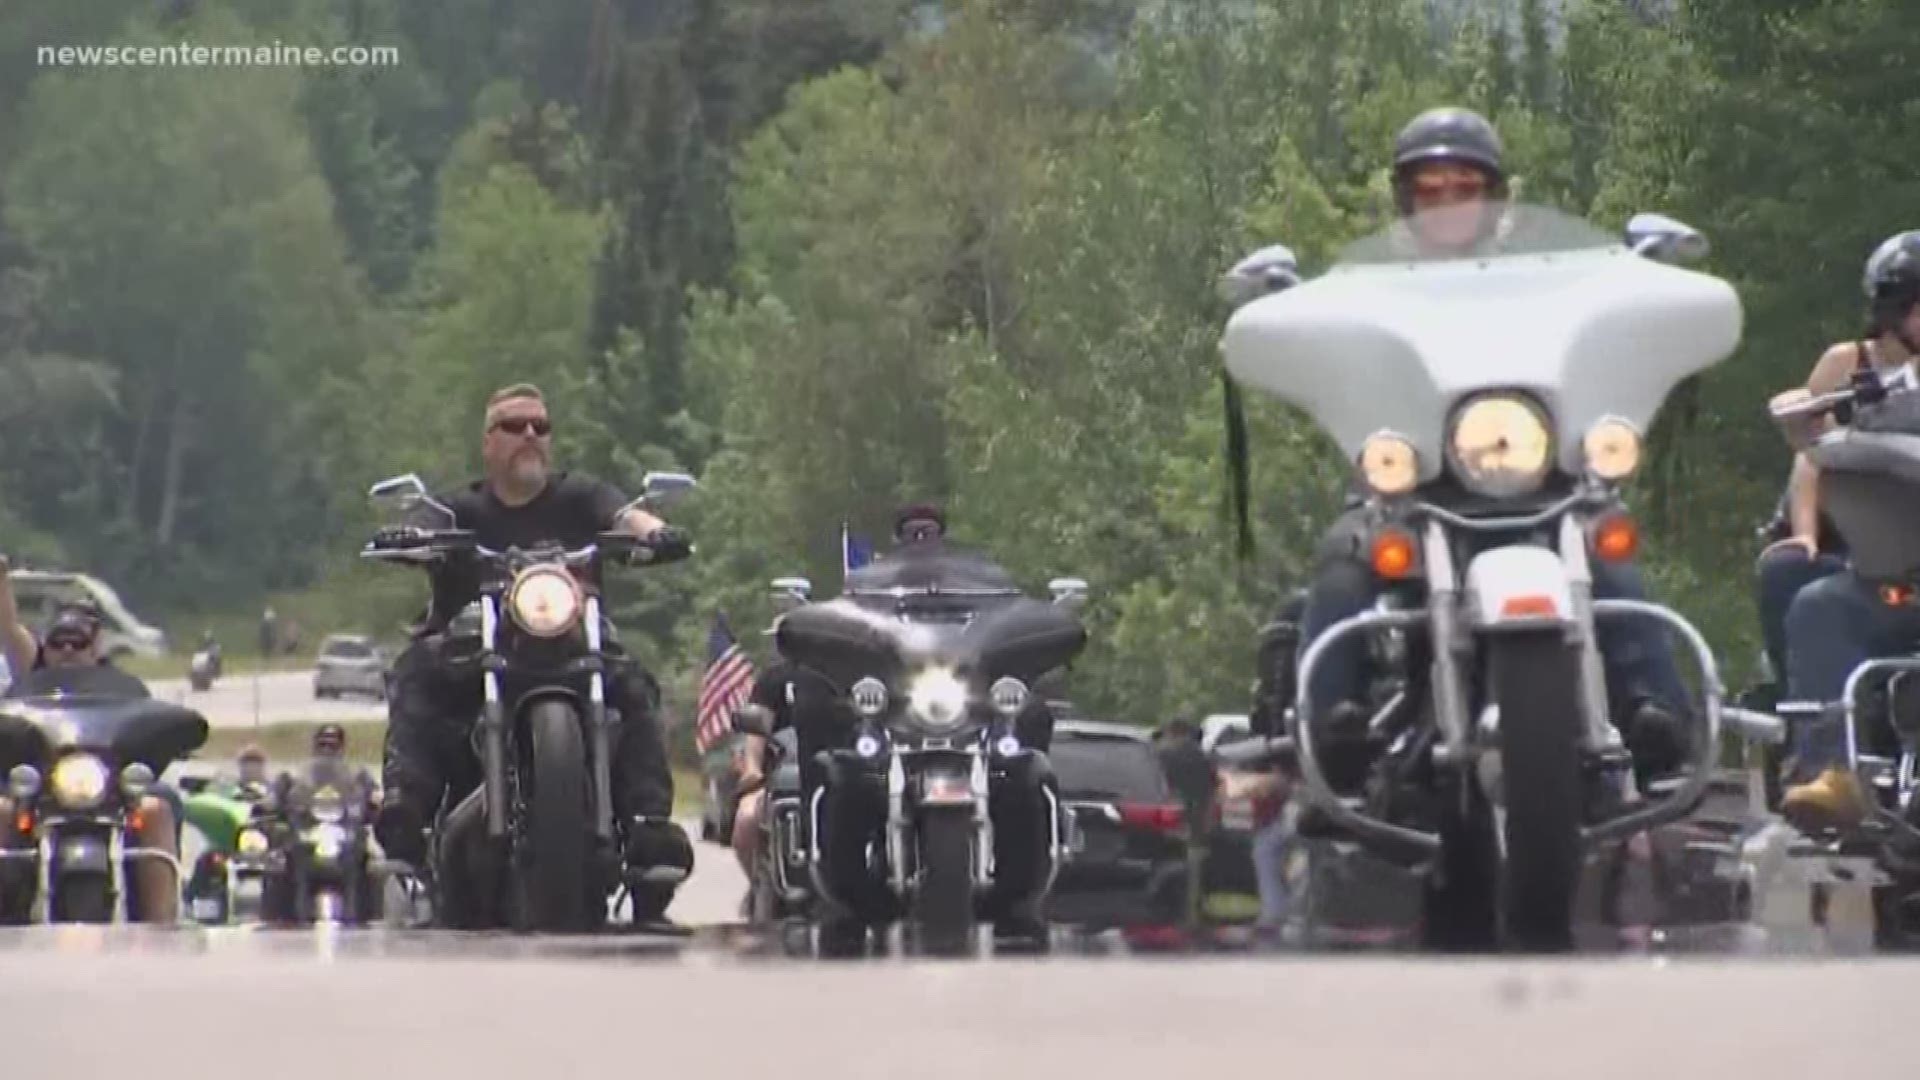 Thousands of motorcyclists joined the "Ride for the Fallen 7." The giant motorcycle ride honored the bikers who were killed in a crash in Randolph, New Hampshire.